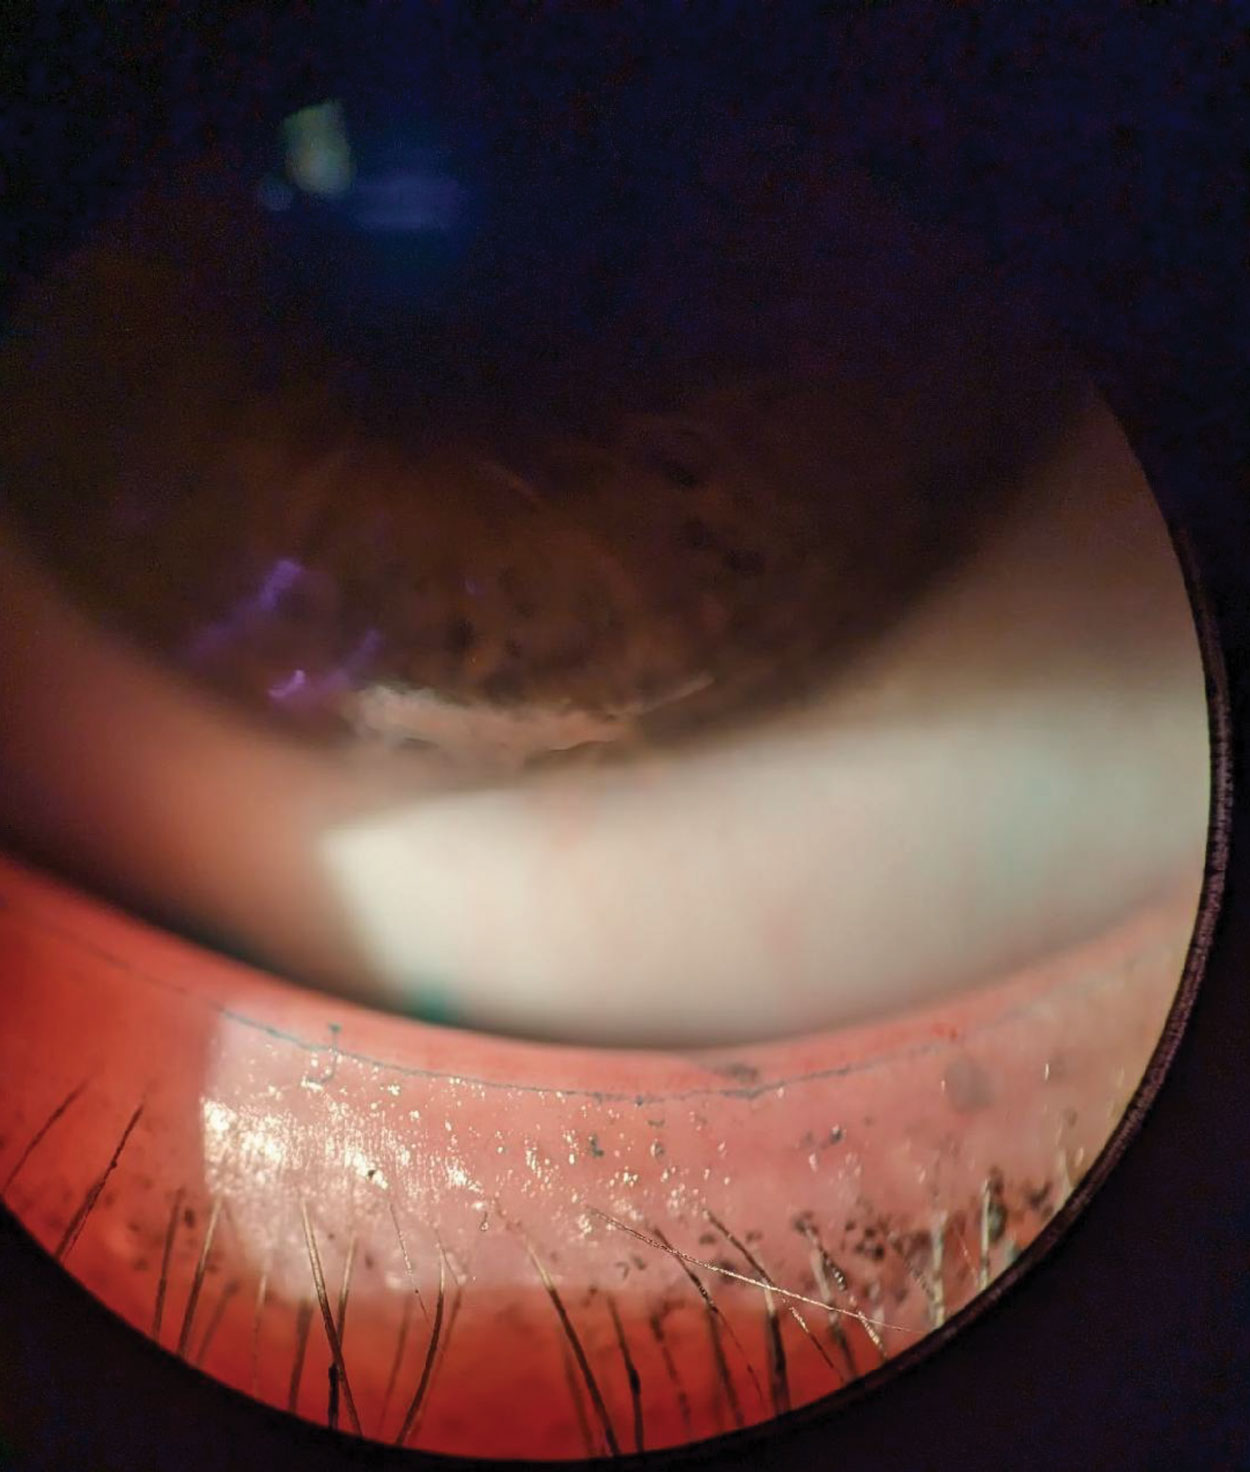 Slit lamp image of lissamine green staining of Marx’s Line on the lower lid, marking the mucocutaneous junction of the eyelid.